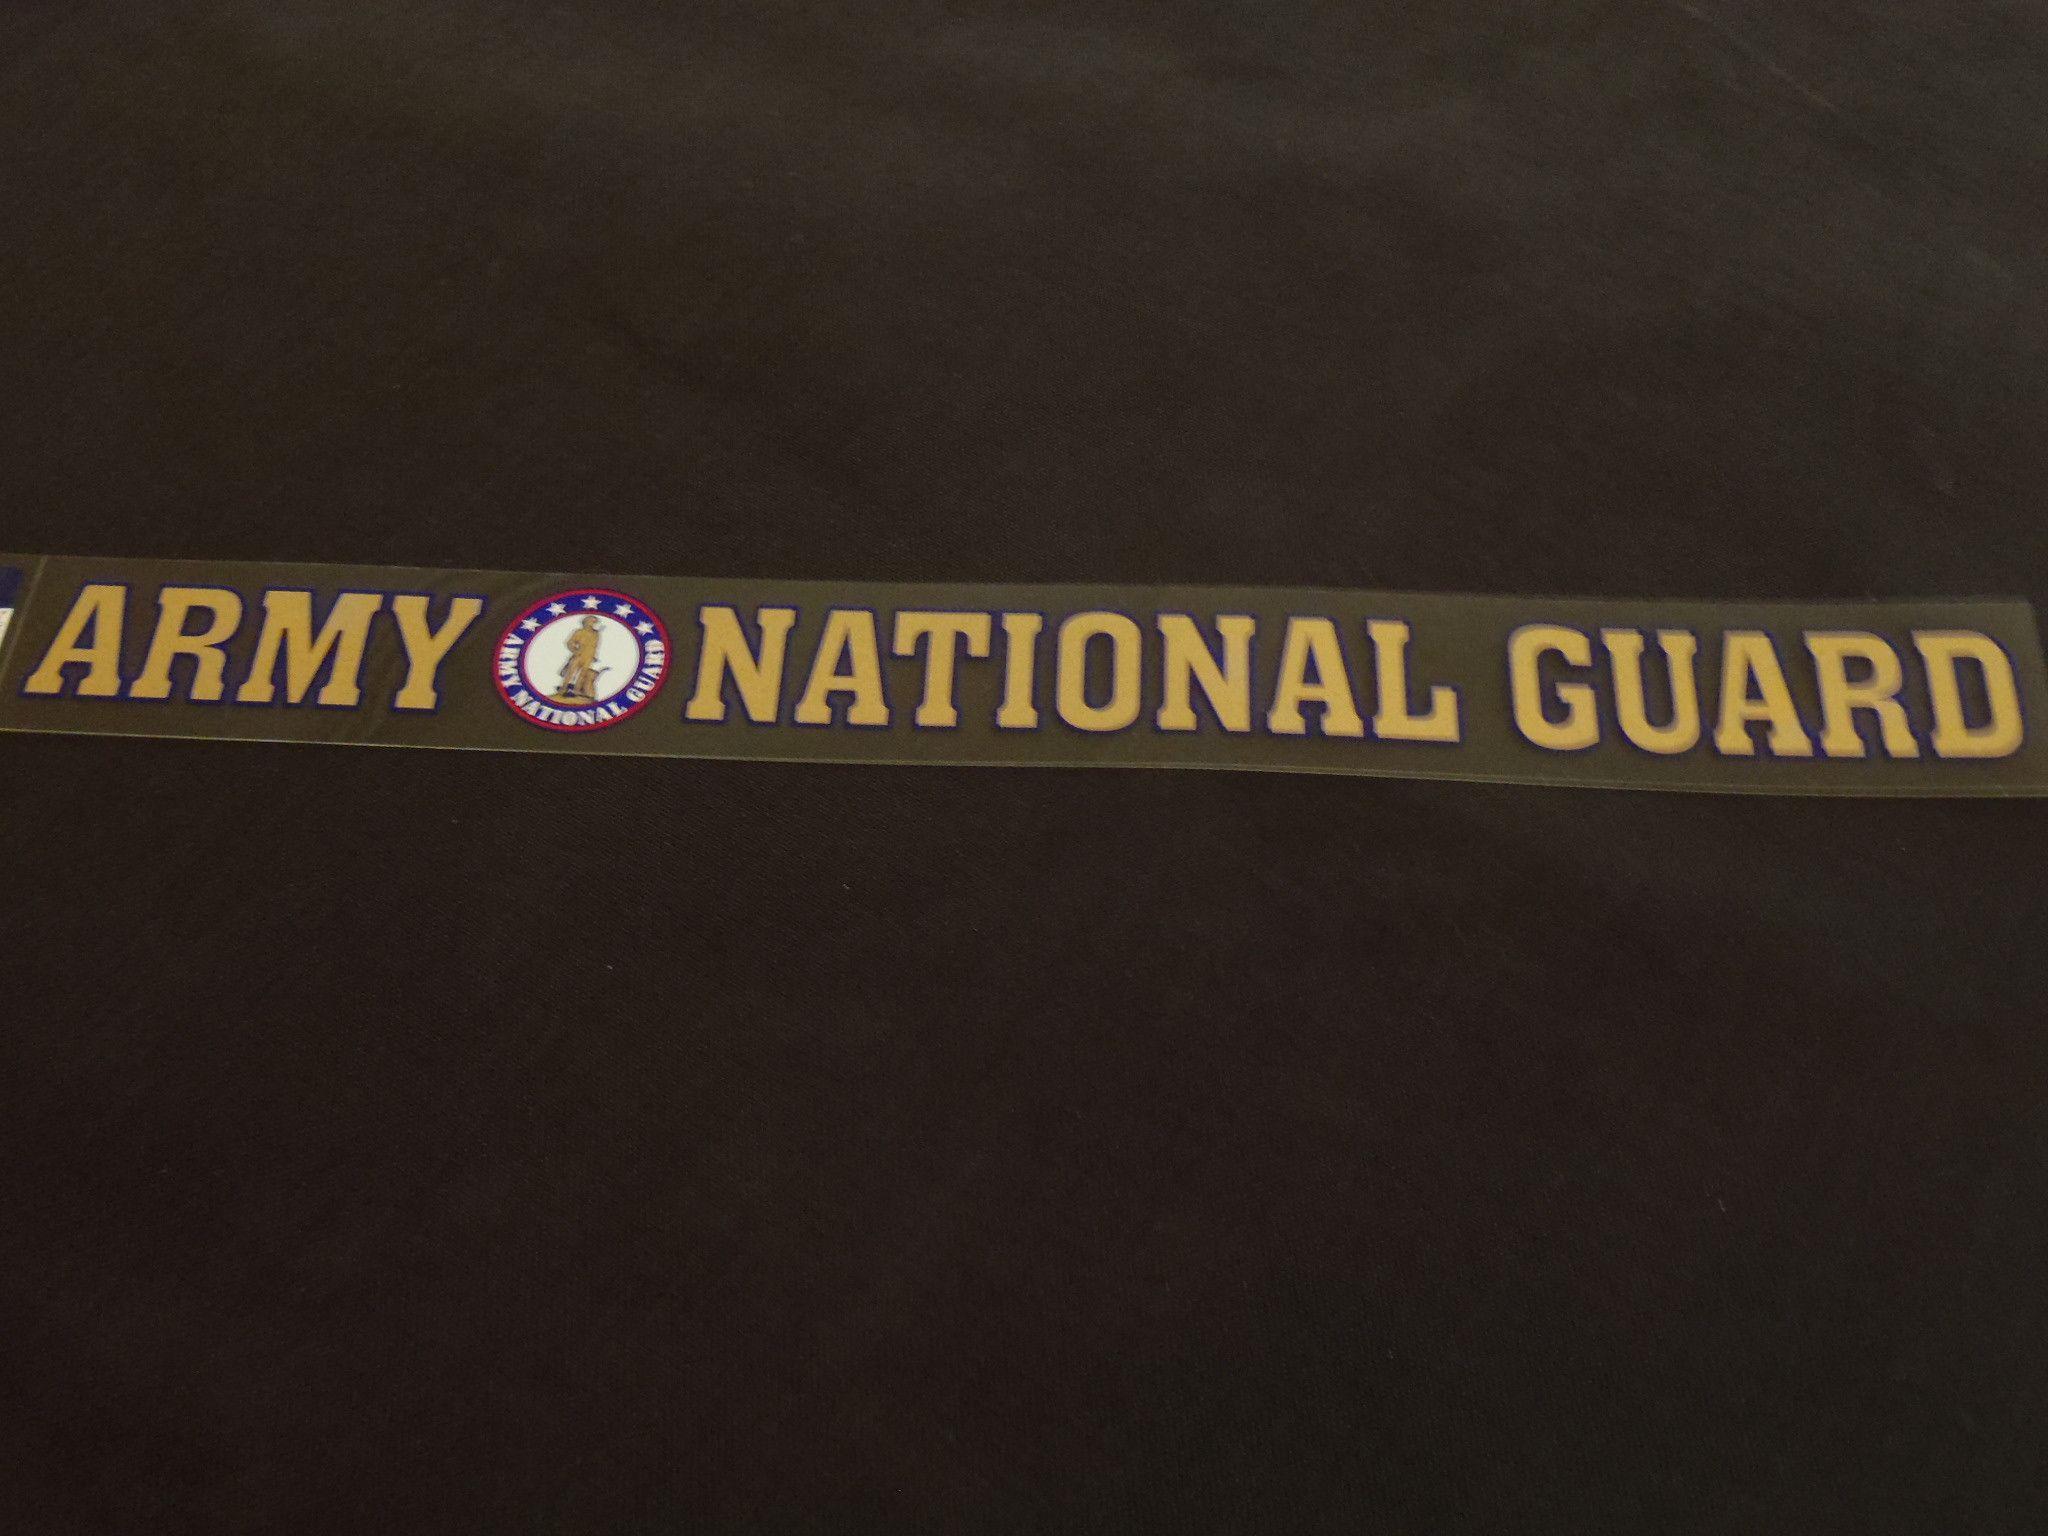 Army National Guard Decal [D133 A] $2.50, Wings Aviation